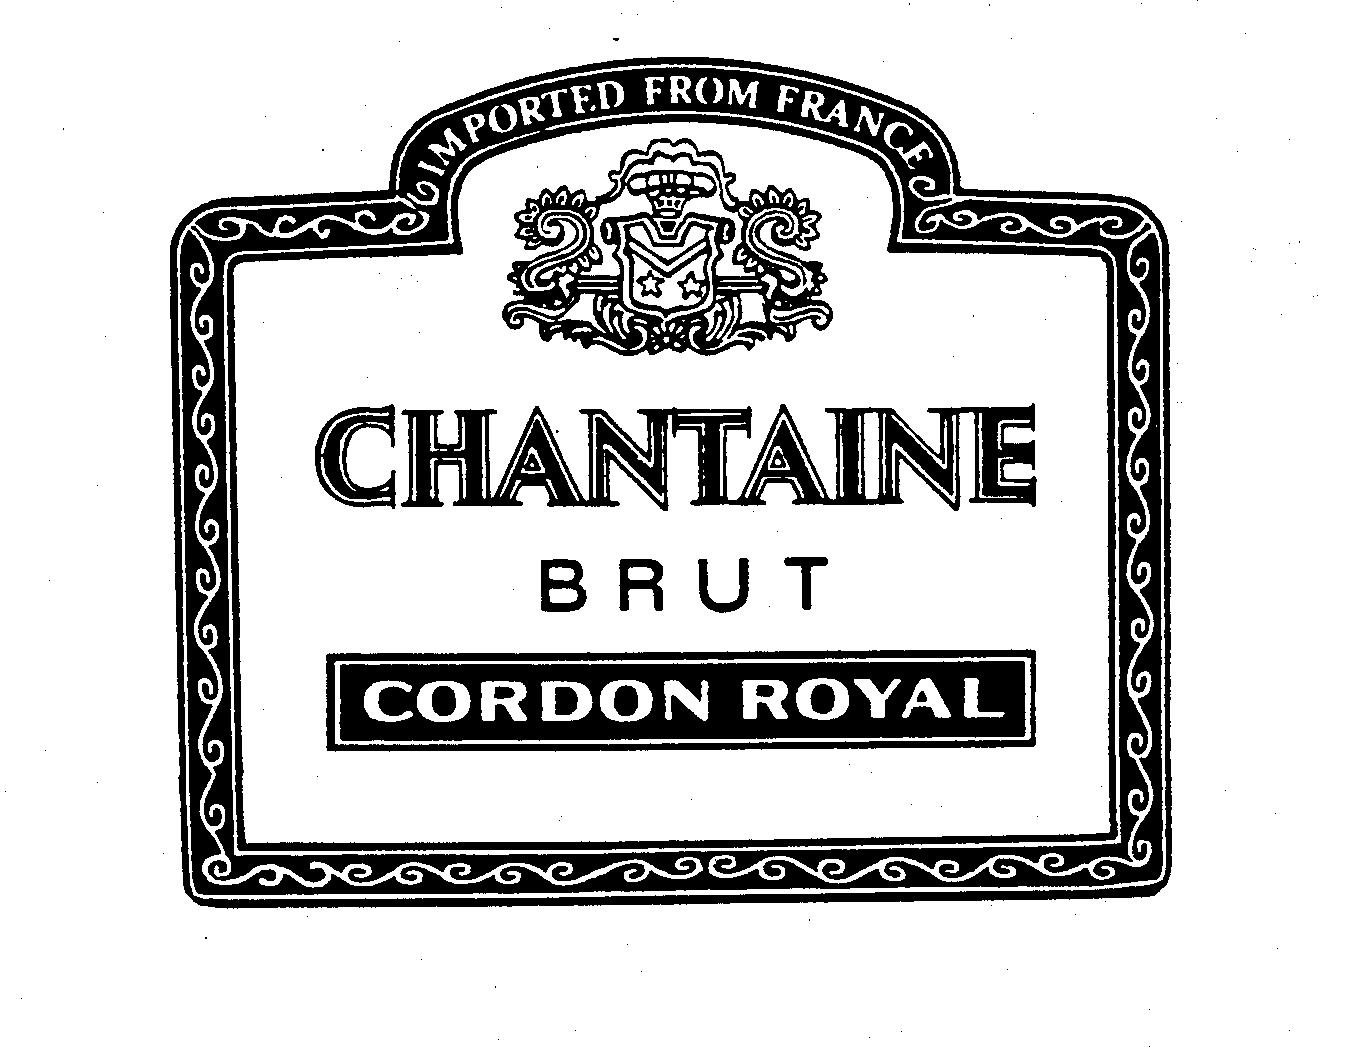  CHANTAINE BRUT CORDON ROYAL IMPORTED FROM FRANCE